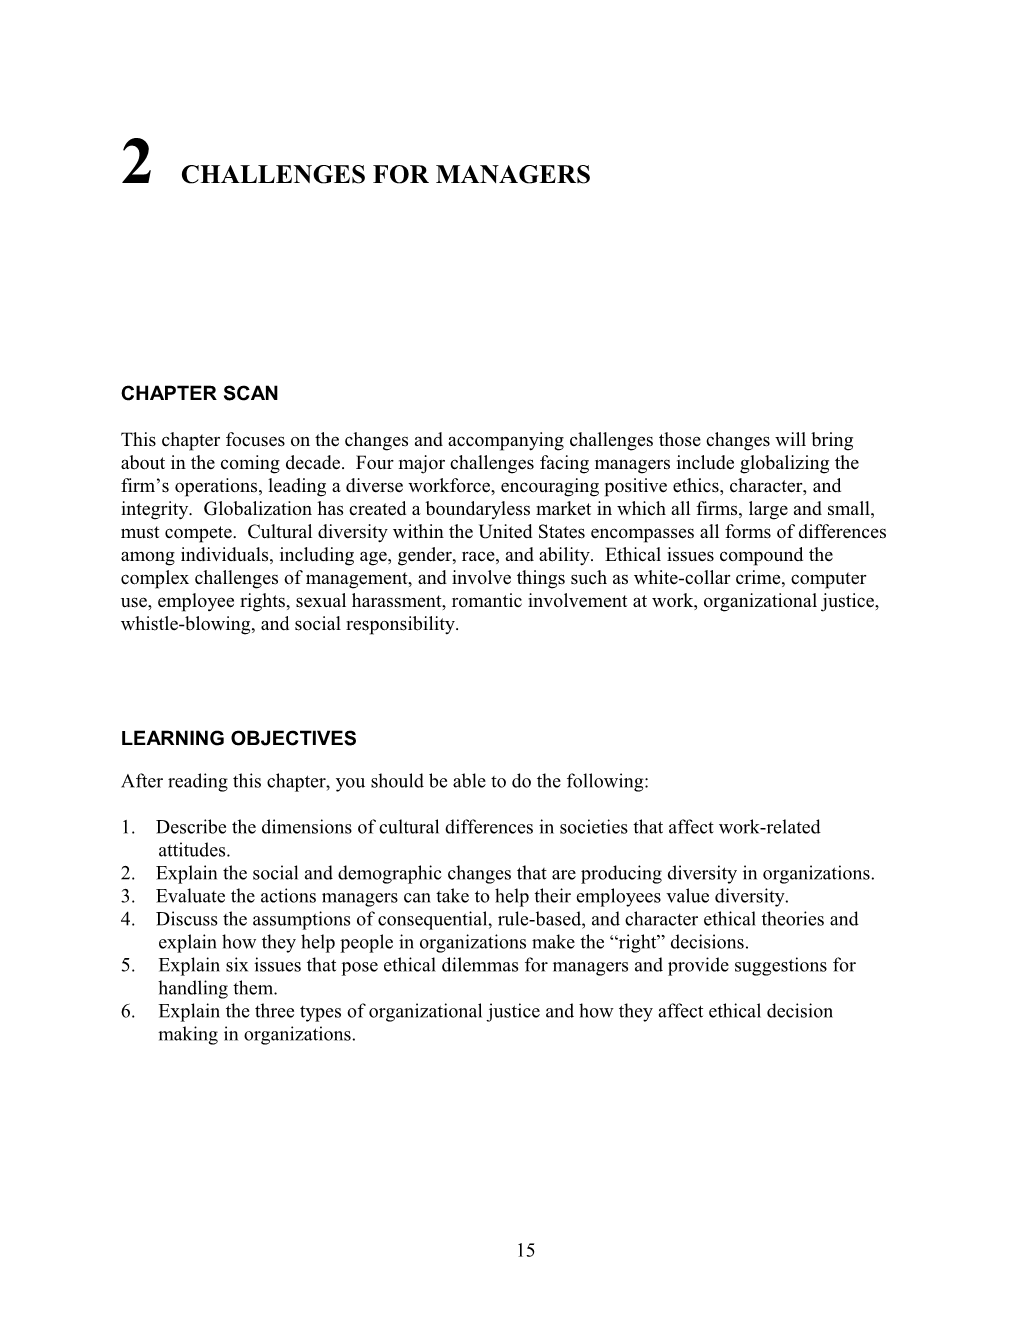 2 Challenges for Managers s2